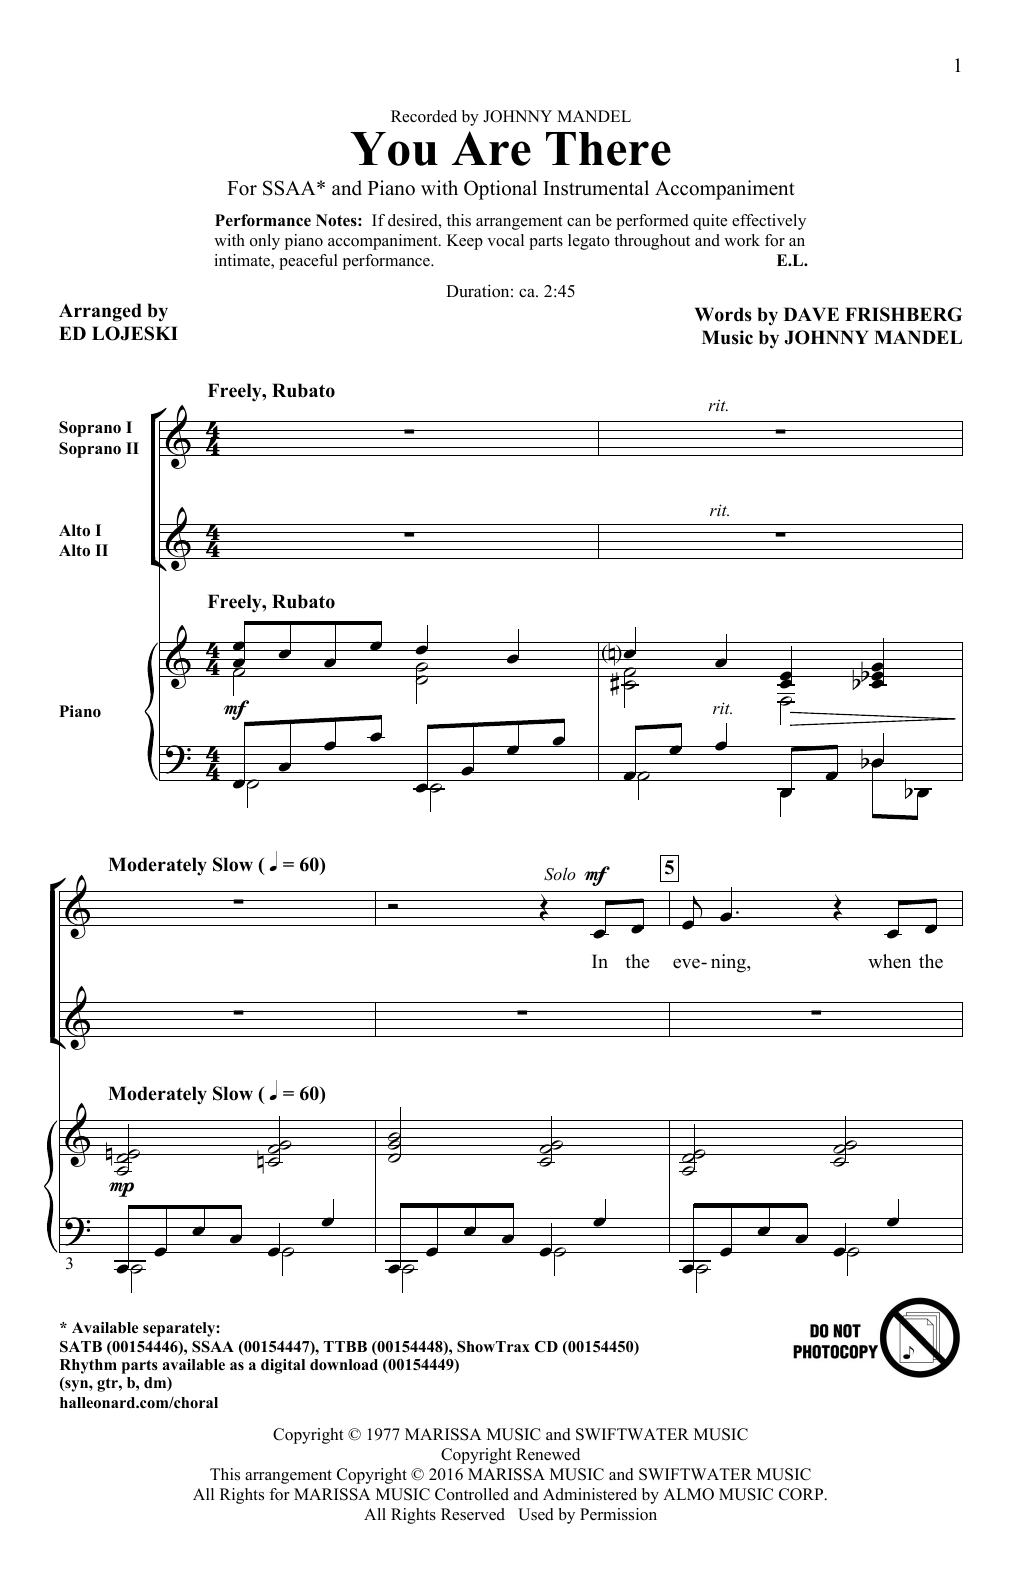 Download Ed Lojeski You Are There Sheet Music